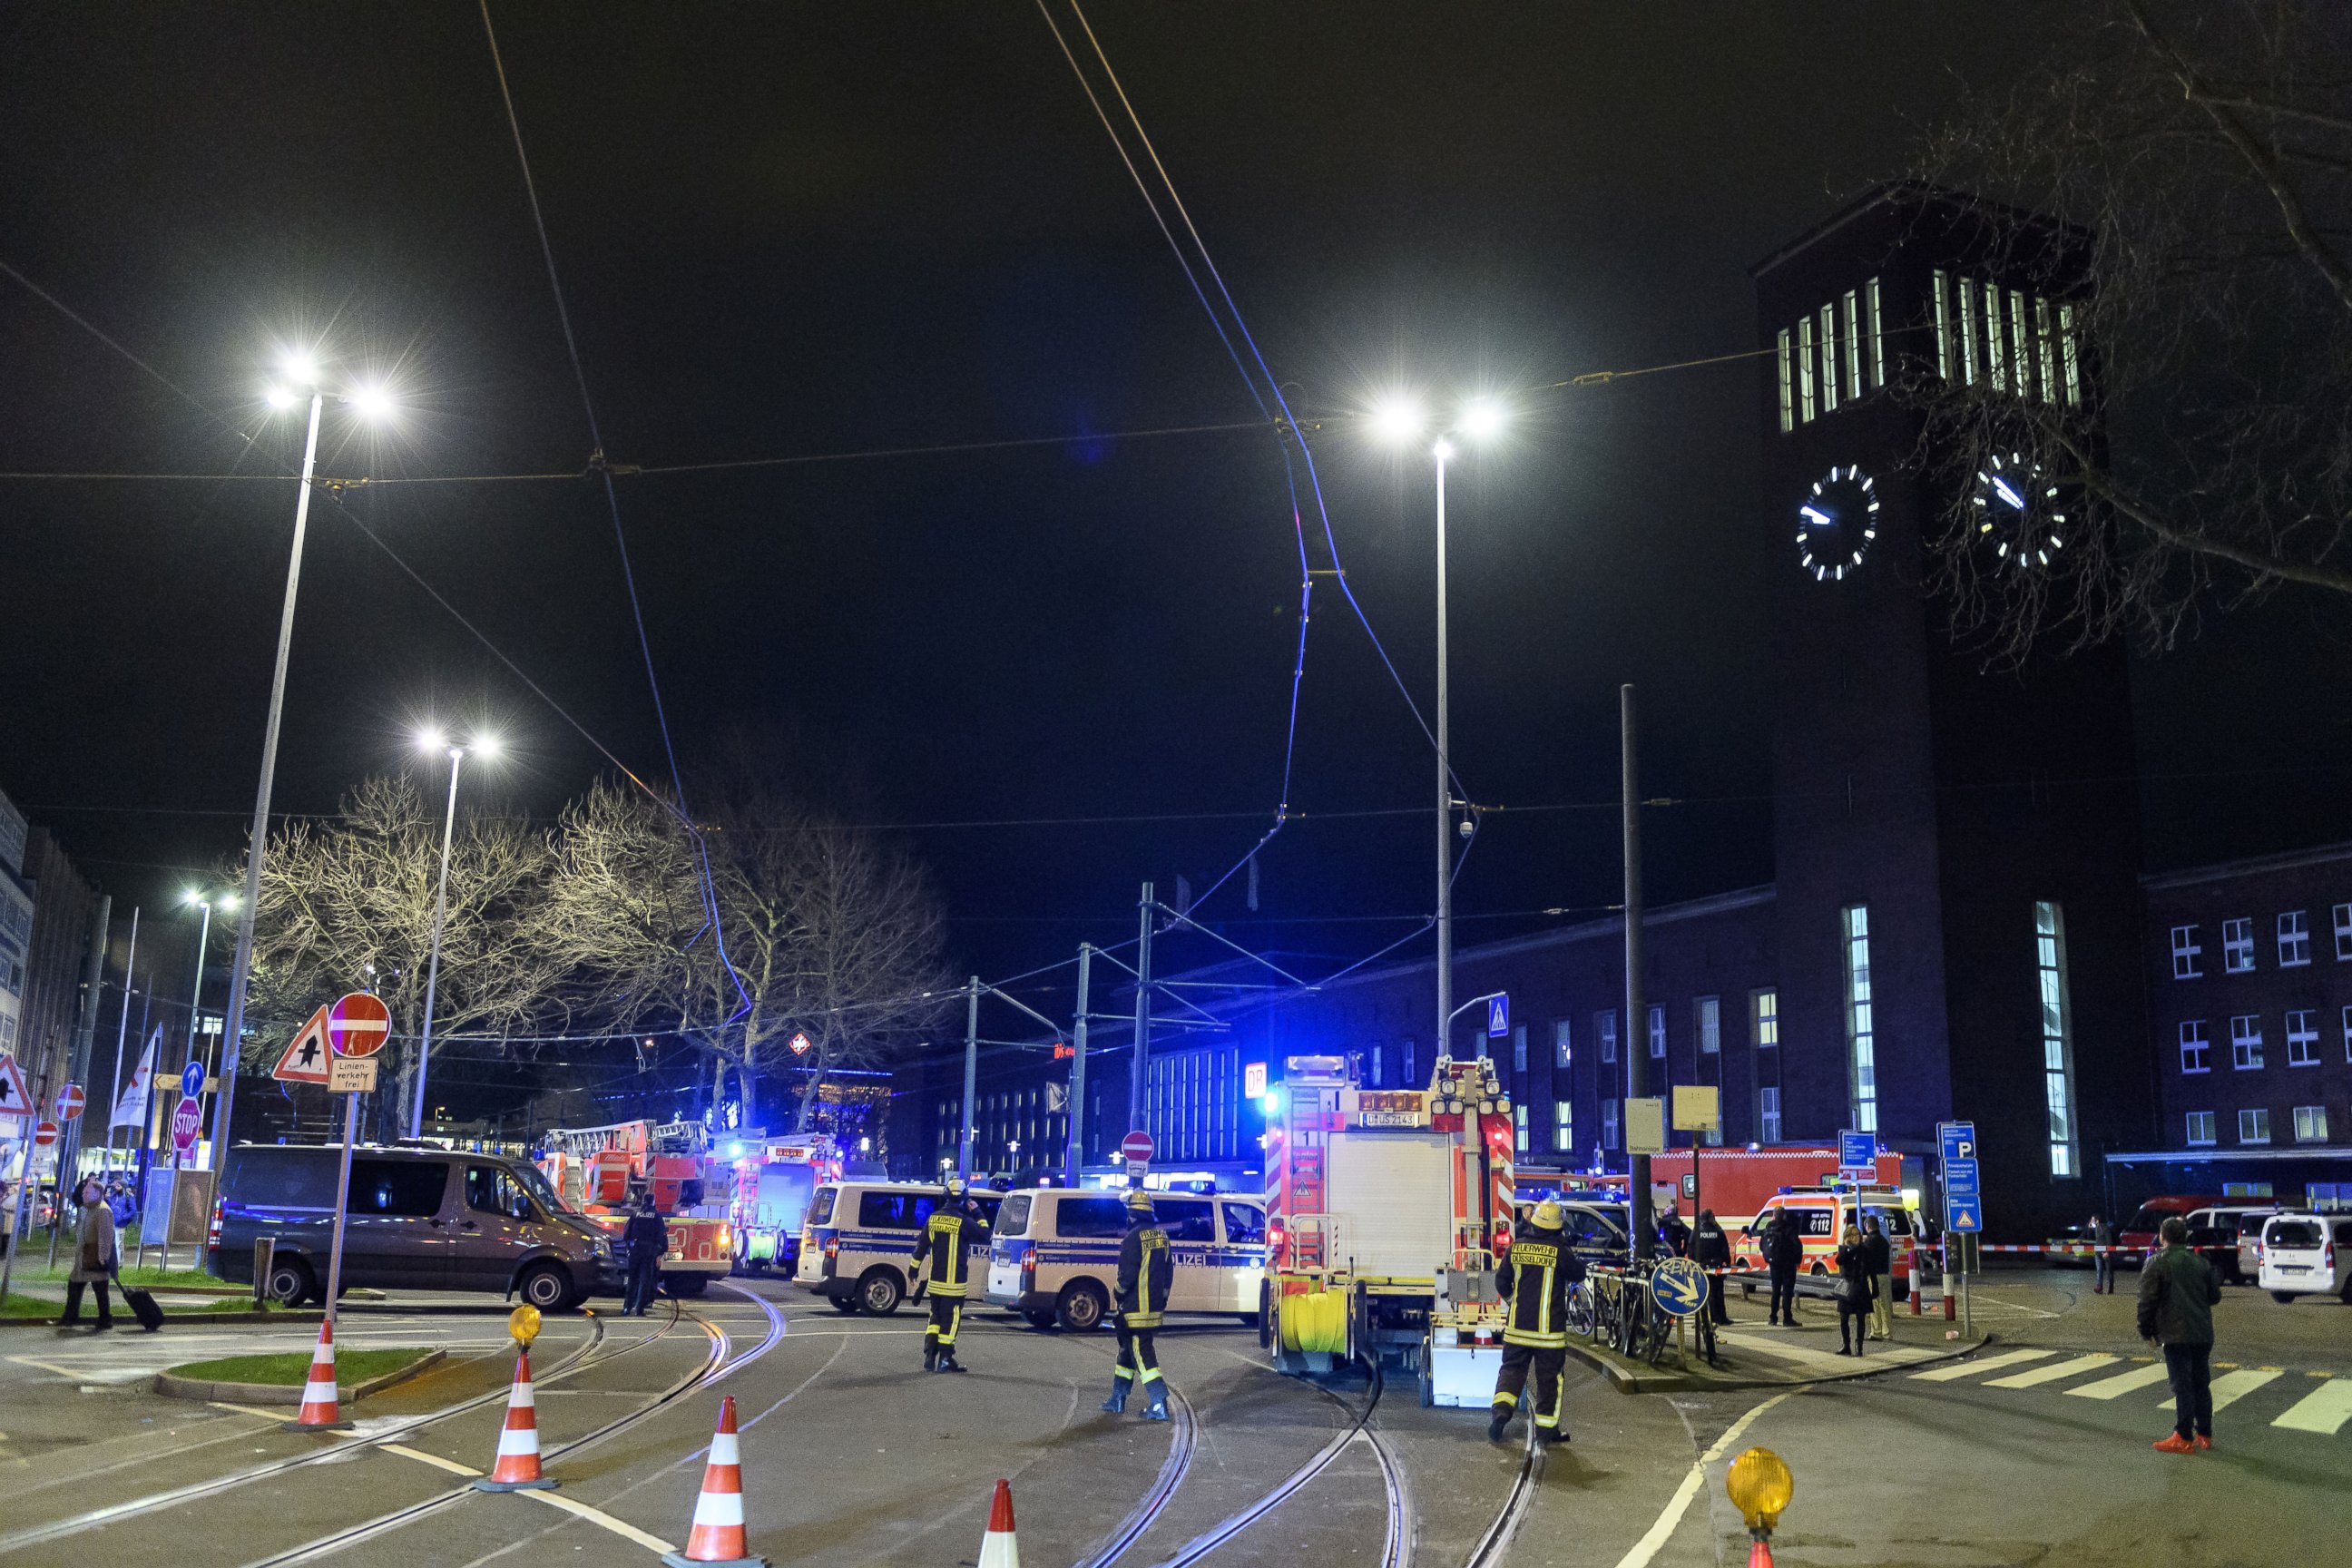 PHOTO: Police and emergency workers stand outside the main railway station following what police described as an ax attack, March 9, 2017 in Dusseldorf, Germany.